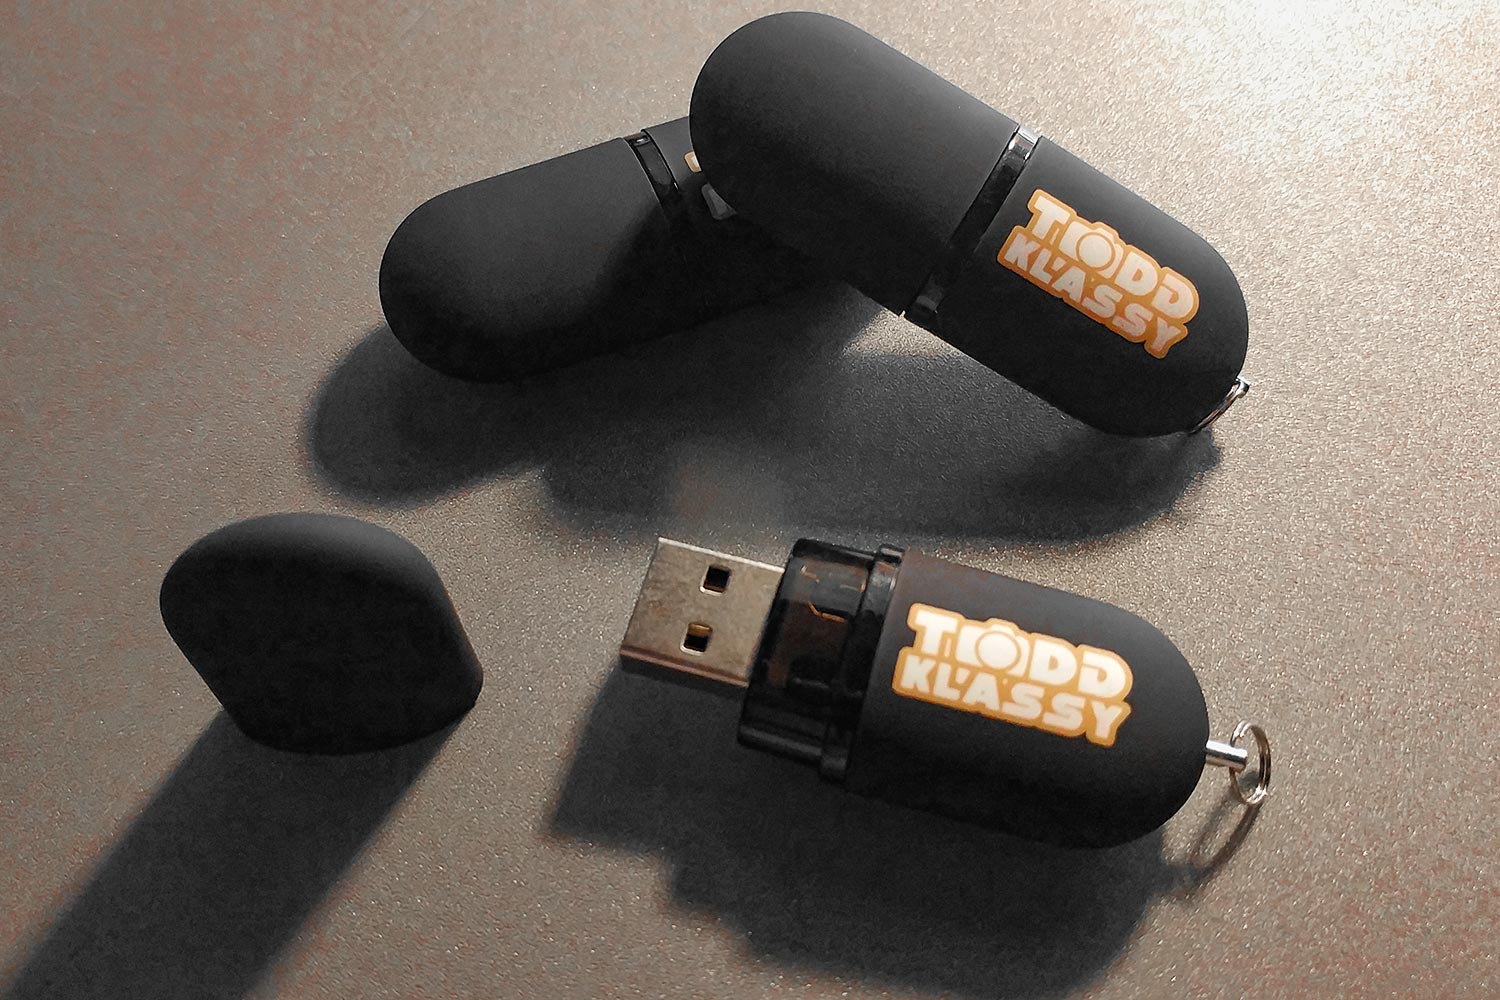 Happy with my USB flash drives